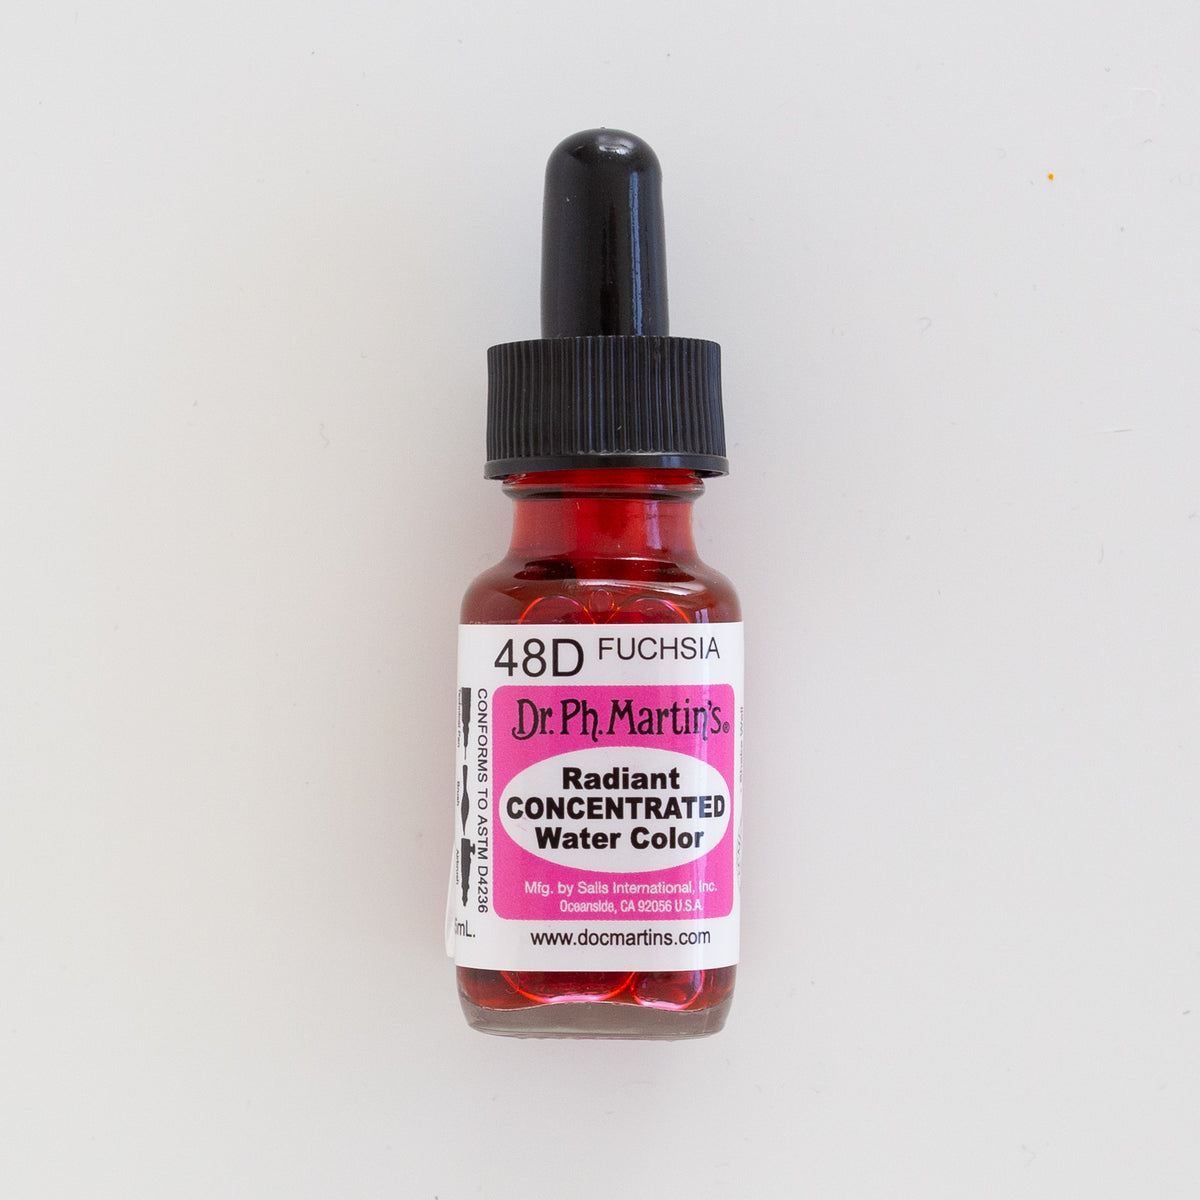 DR. Ph. Martin's Radiant Concentrated 48D Fuchsia